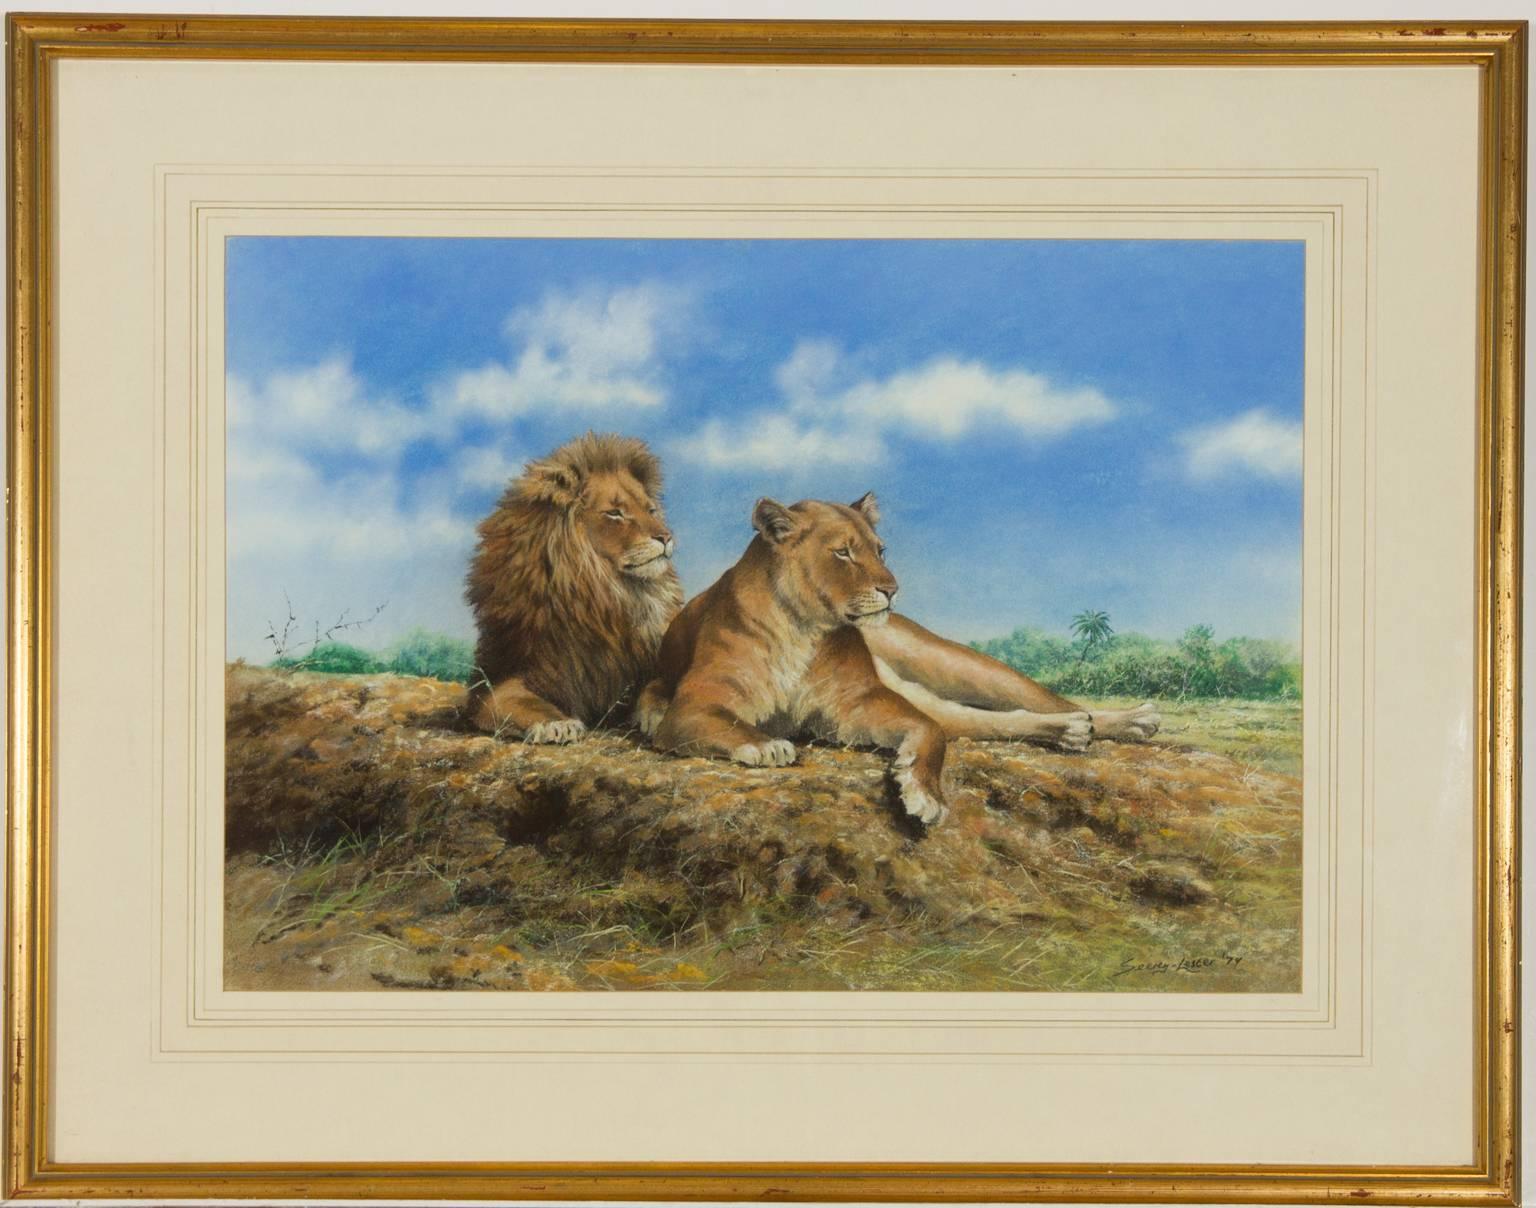 A fine pastel drawing in a high realism style, depicting a lion and lioness. By the well listed British artist John Seerey-Lester (b.1945), signed to the lower right. Presented in a washline mount and simple gilt frame. 

Image Size: 36.5 x 52cm